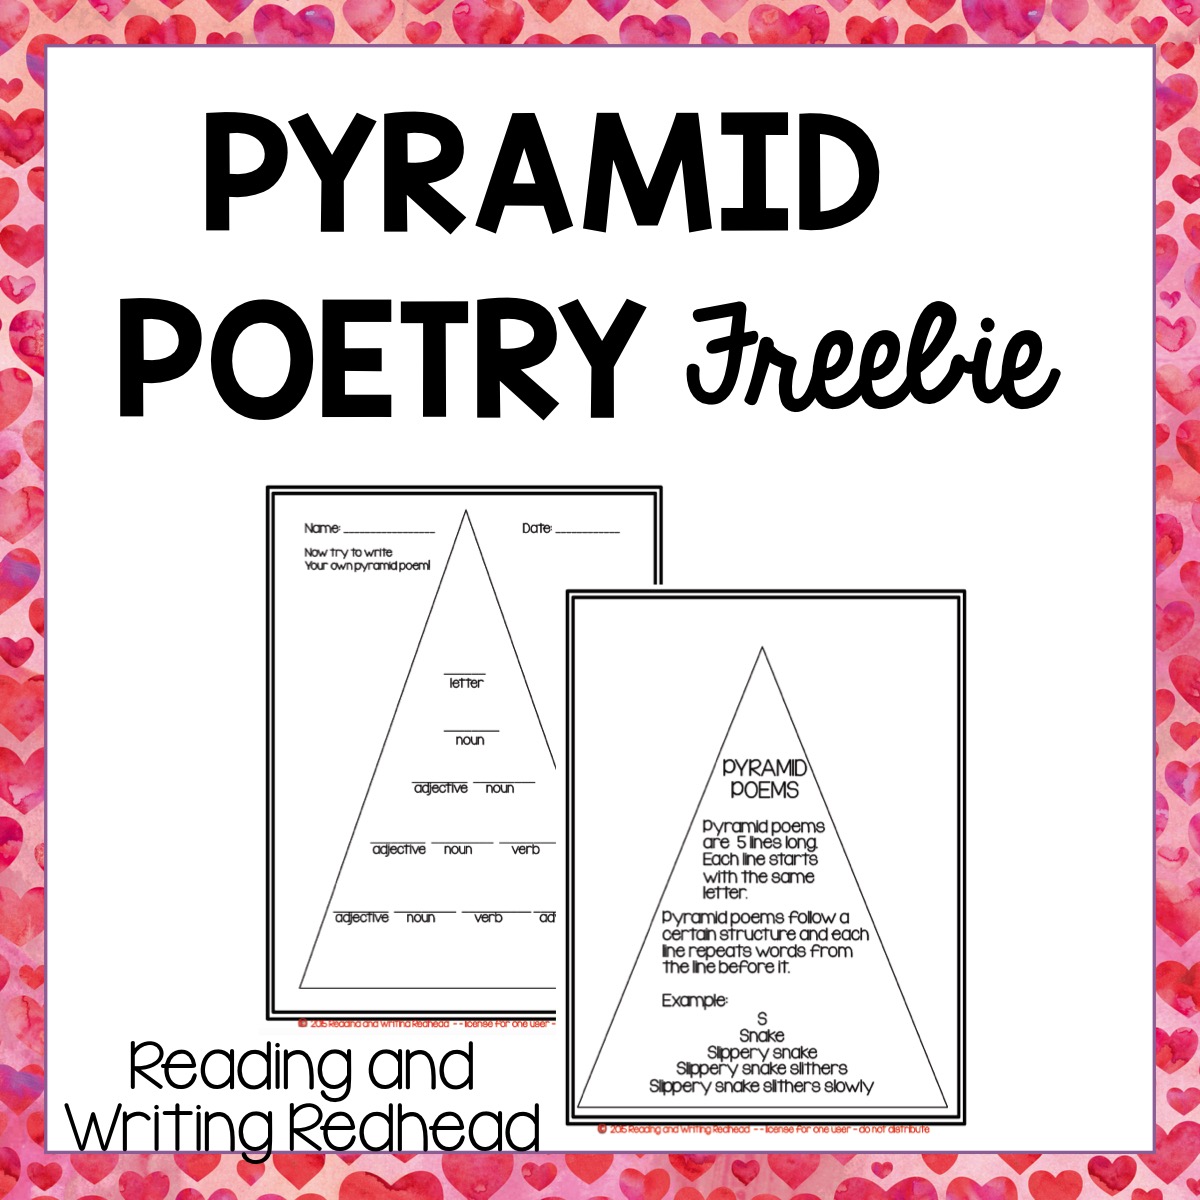 Image of pages from Pyramid Poetry freebie